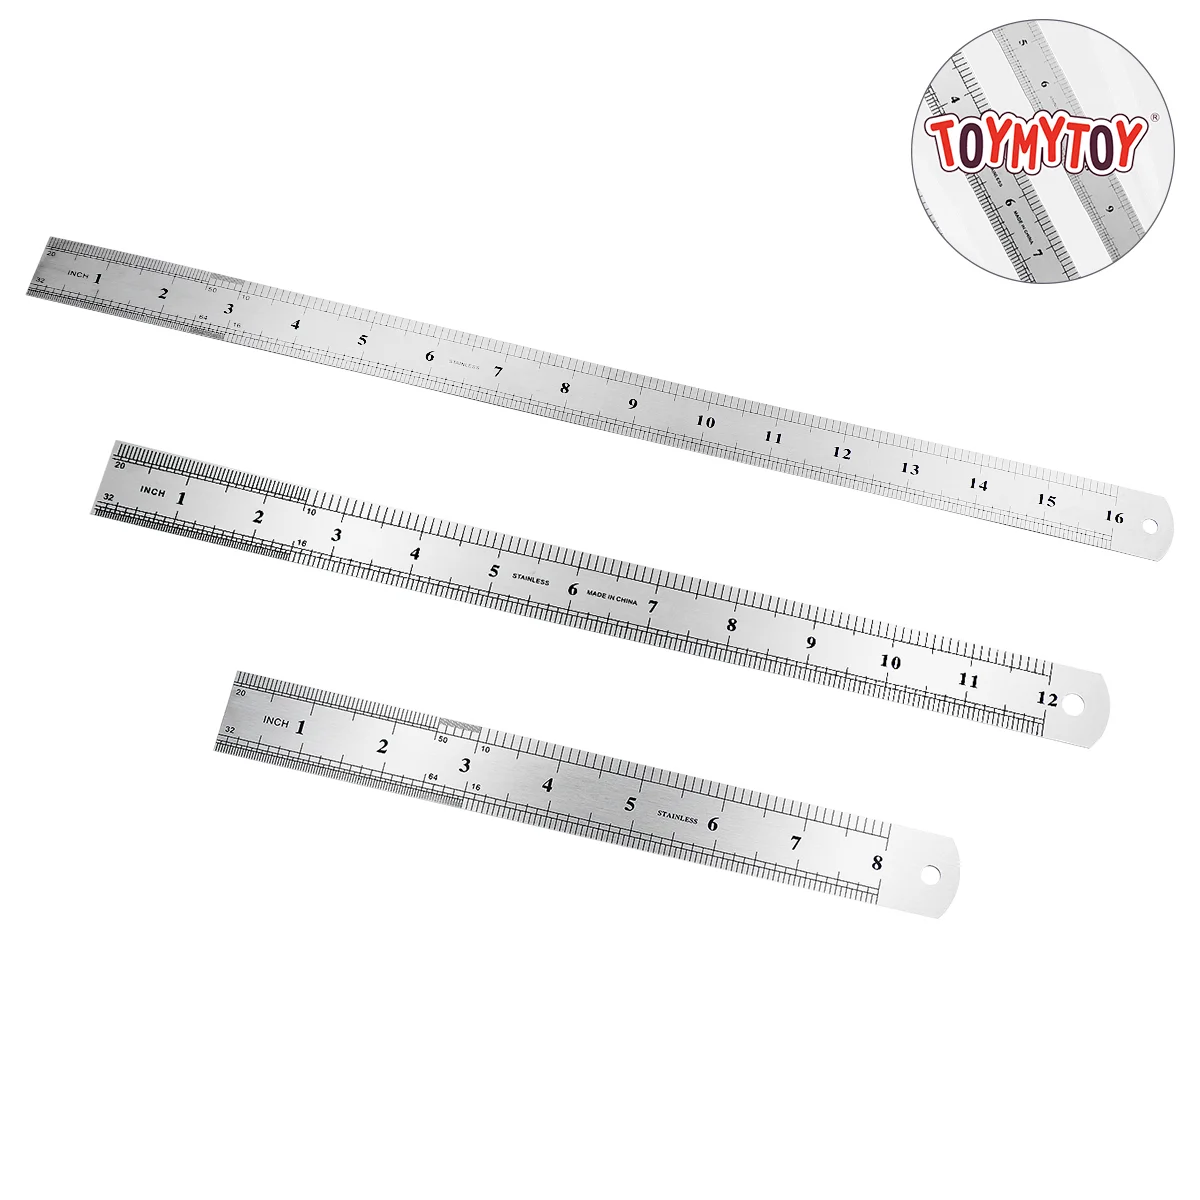 Stainless Steel Ruler, Straight Ruler Metal Measuring Tool with Inch/ Metric 20cm/ 30cm/ 40CM for Engineering Drawing Technical images - 6